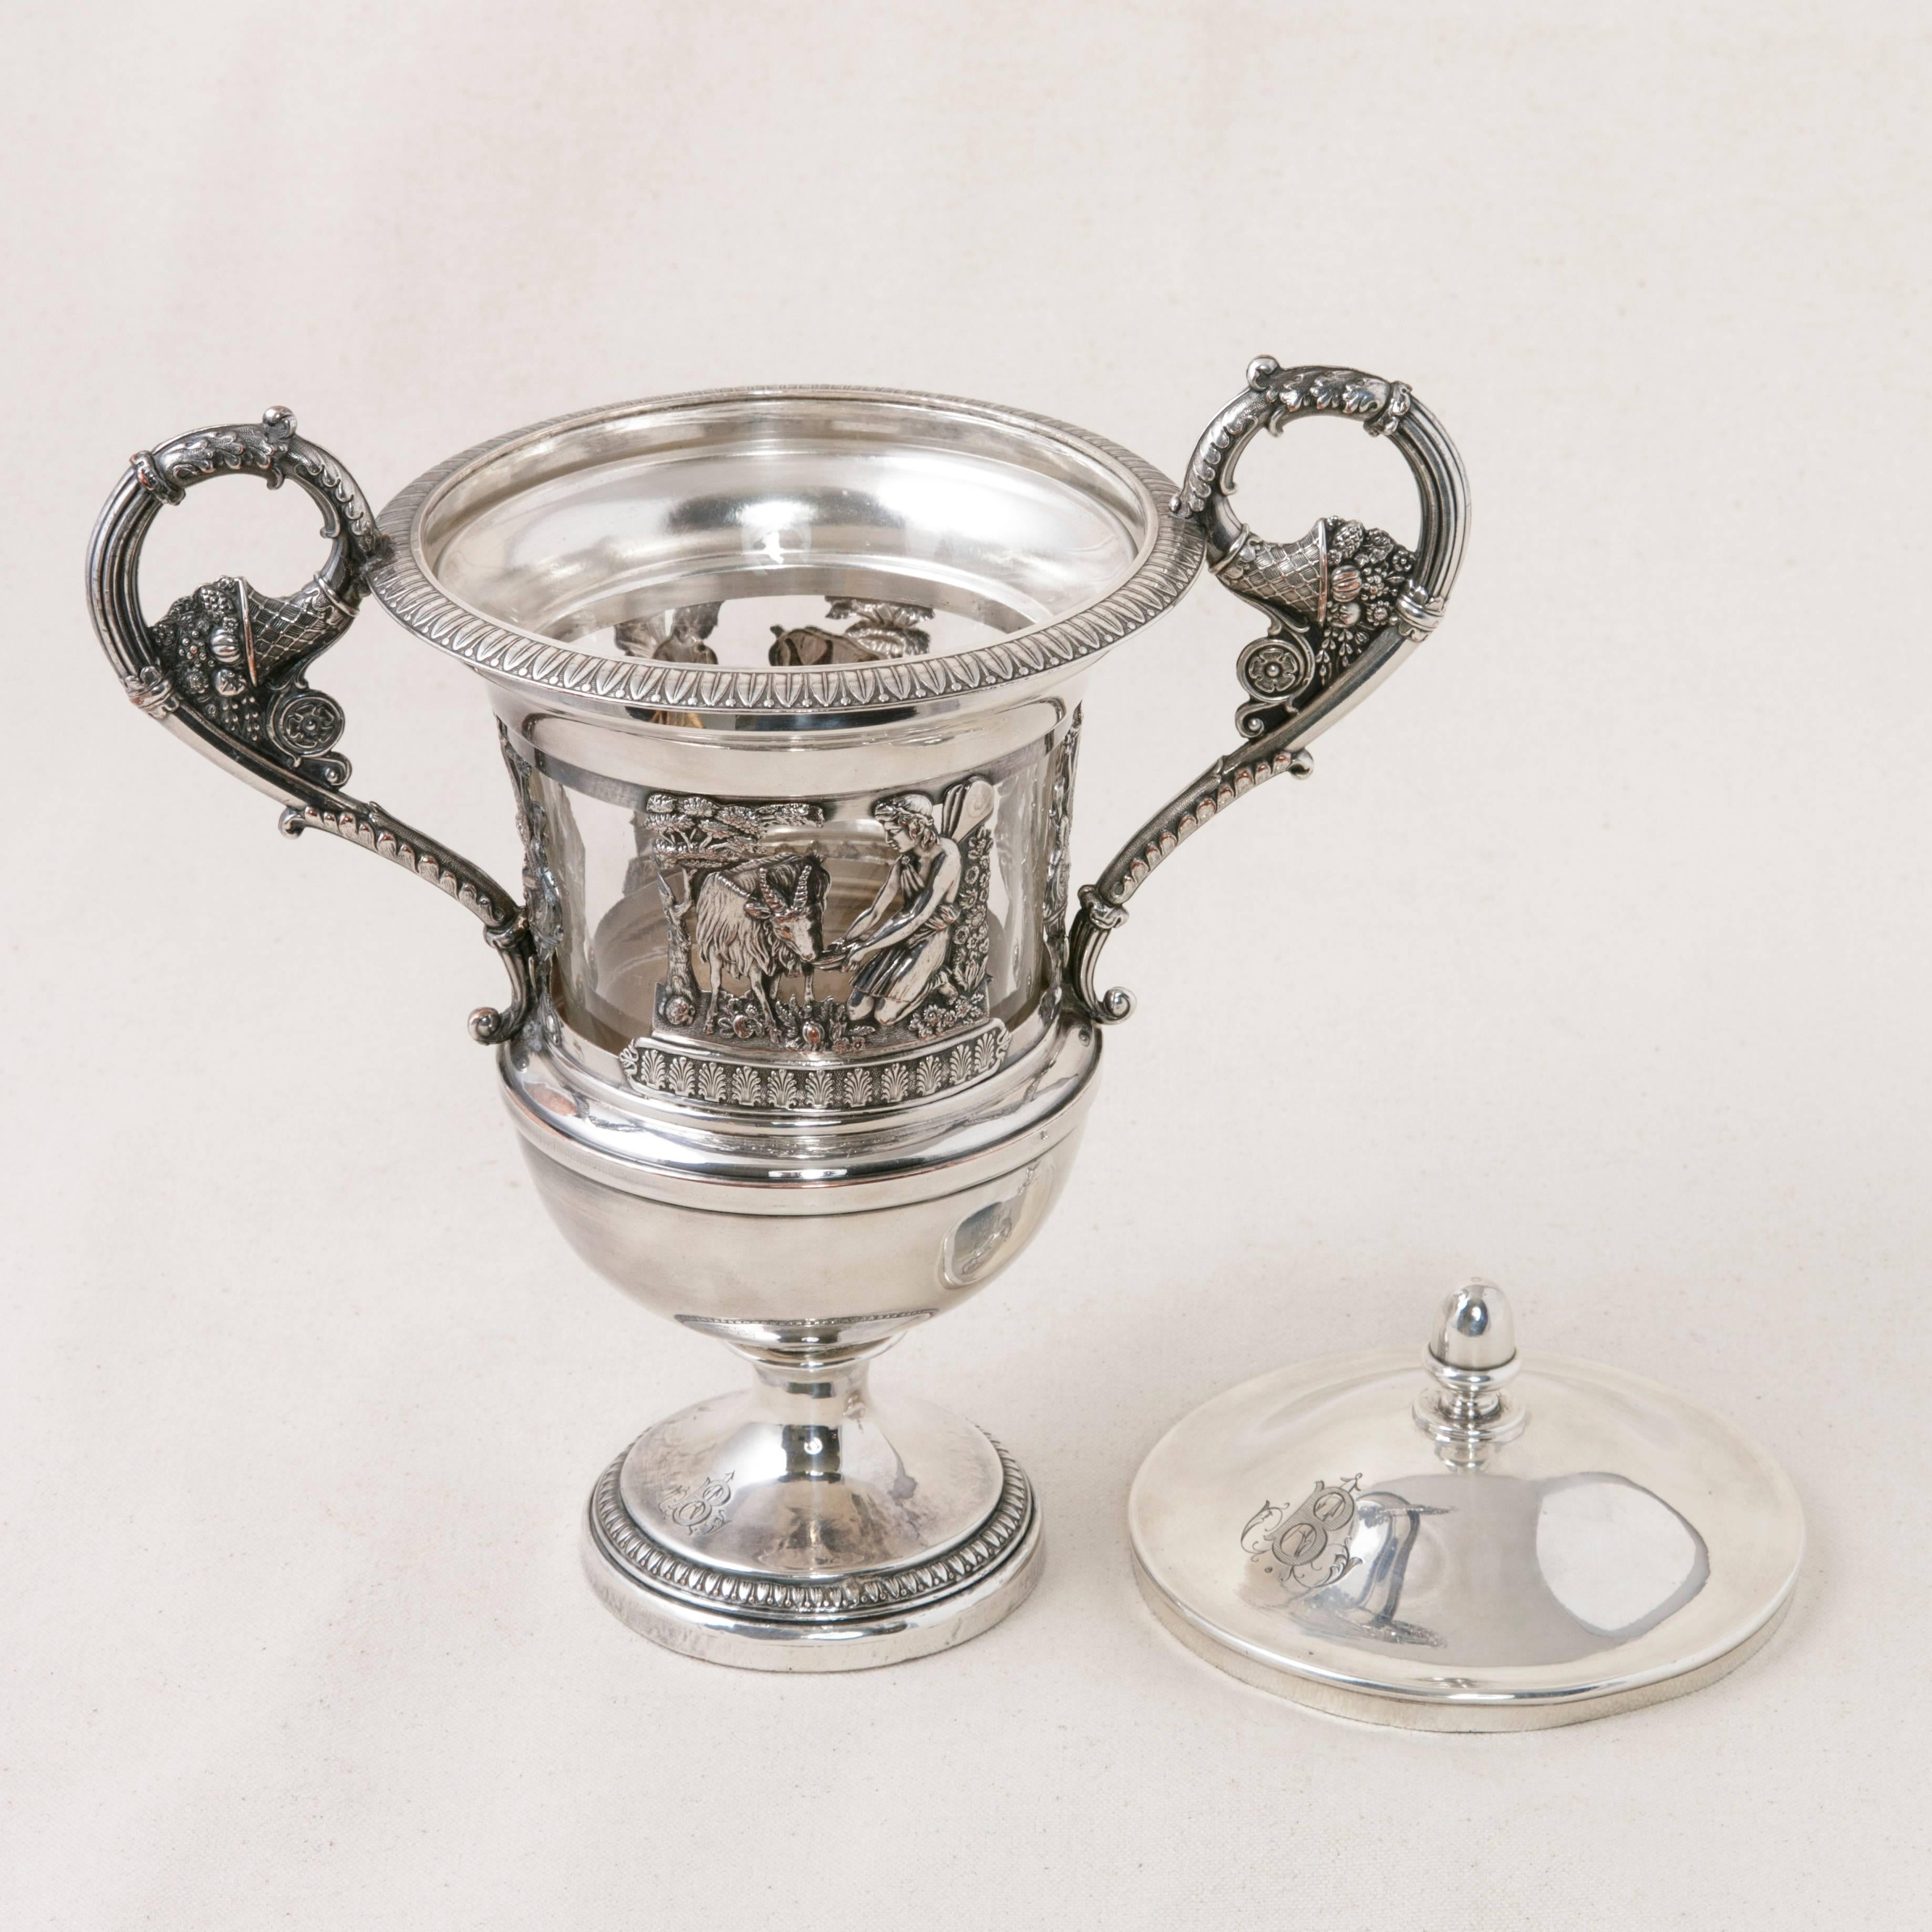 19th Century, English Silver Plate Serving Piece or Urn with Crystal Insert 3